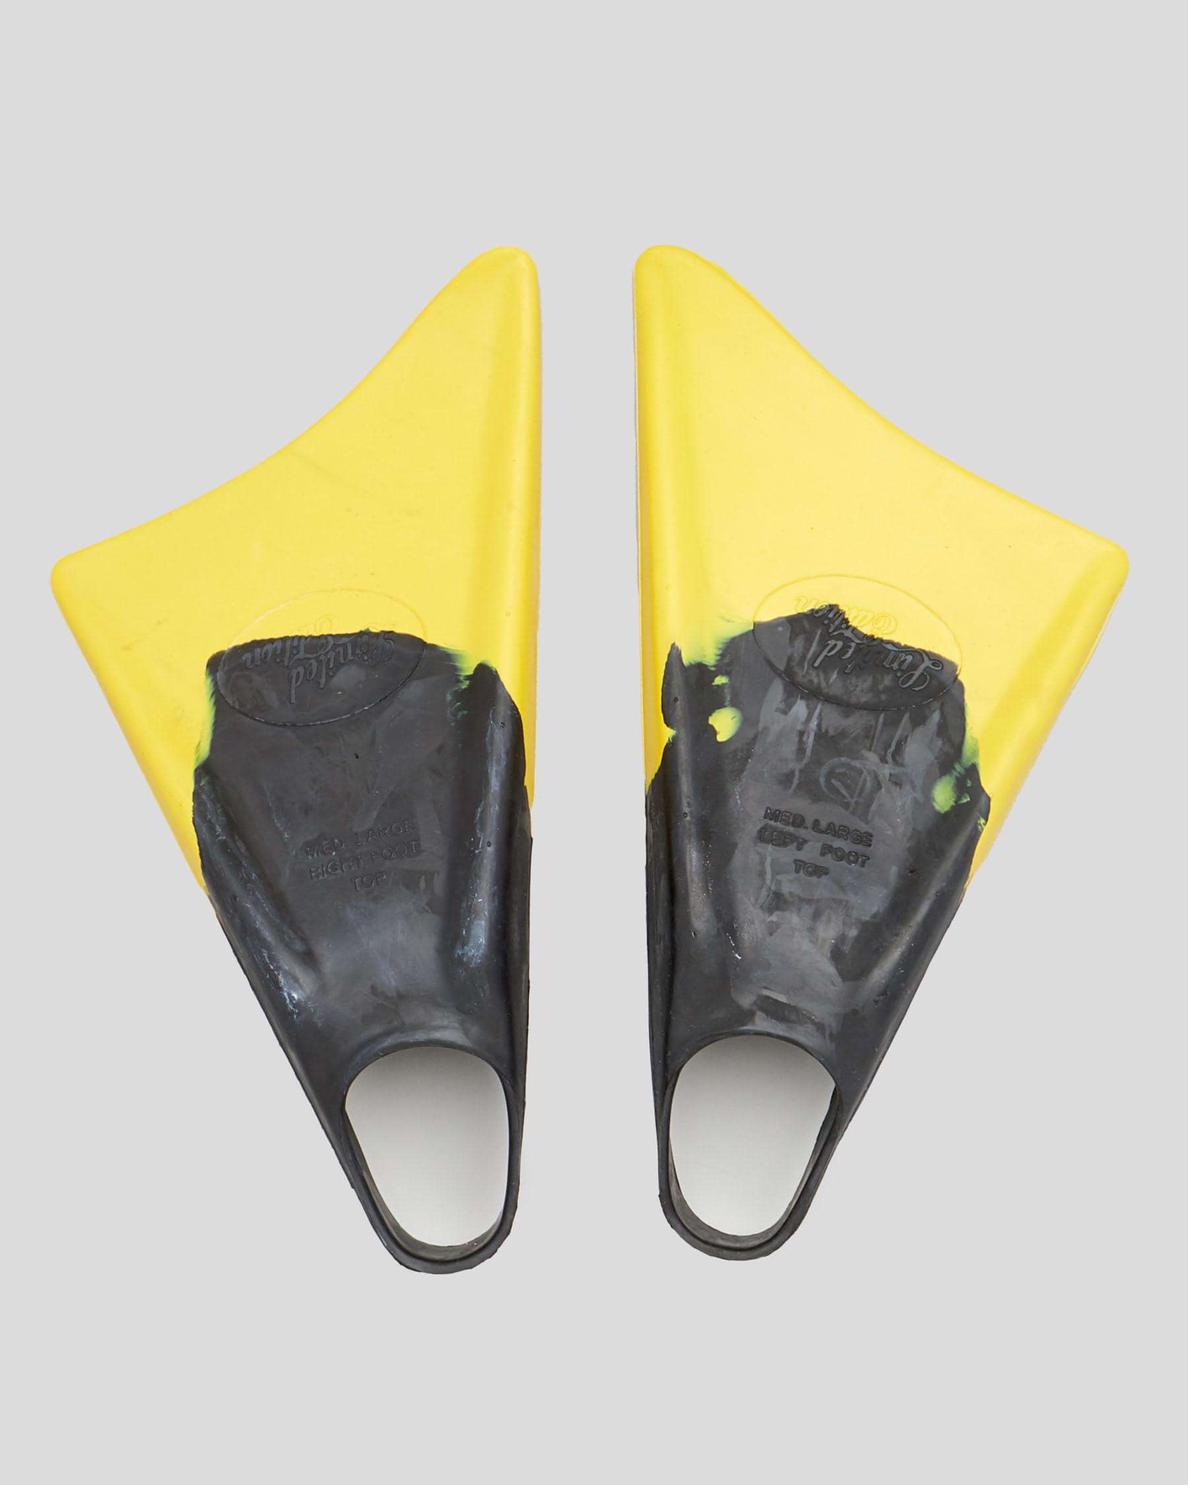 Limited Edition Surf Hardware
 Team Spec A Fins offers at $69.95 in City Beach